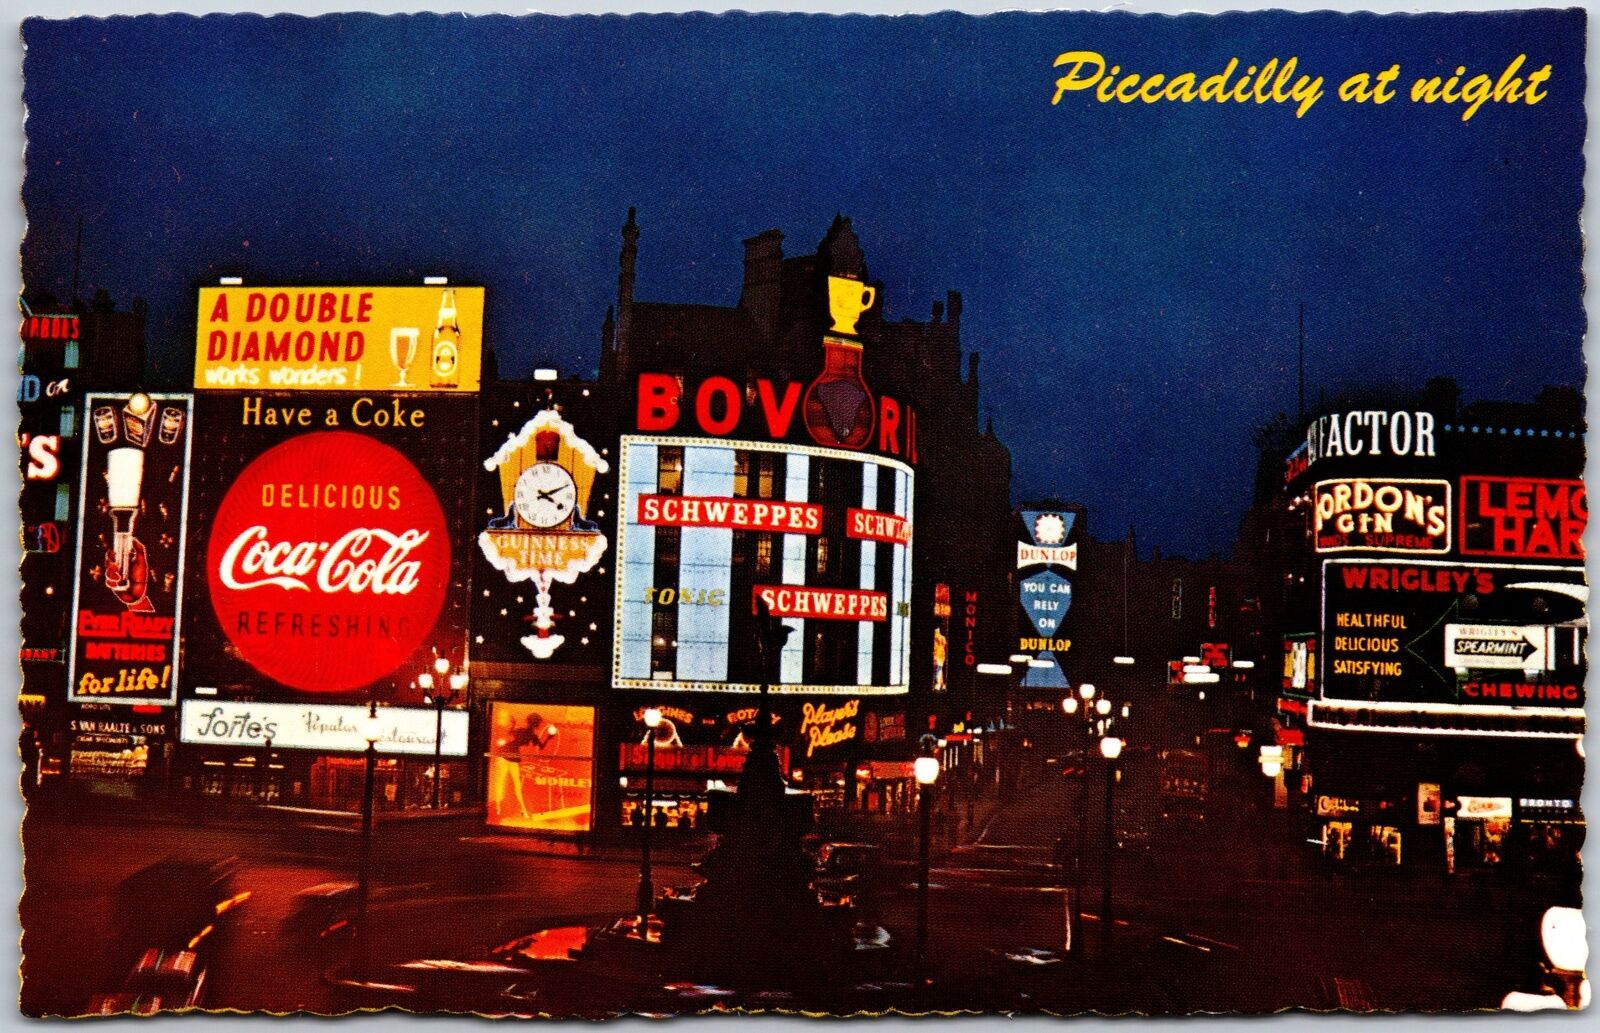 Piccadilly At Night Coca-Cola Wrickley\'s Stores Shops London England Postcard